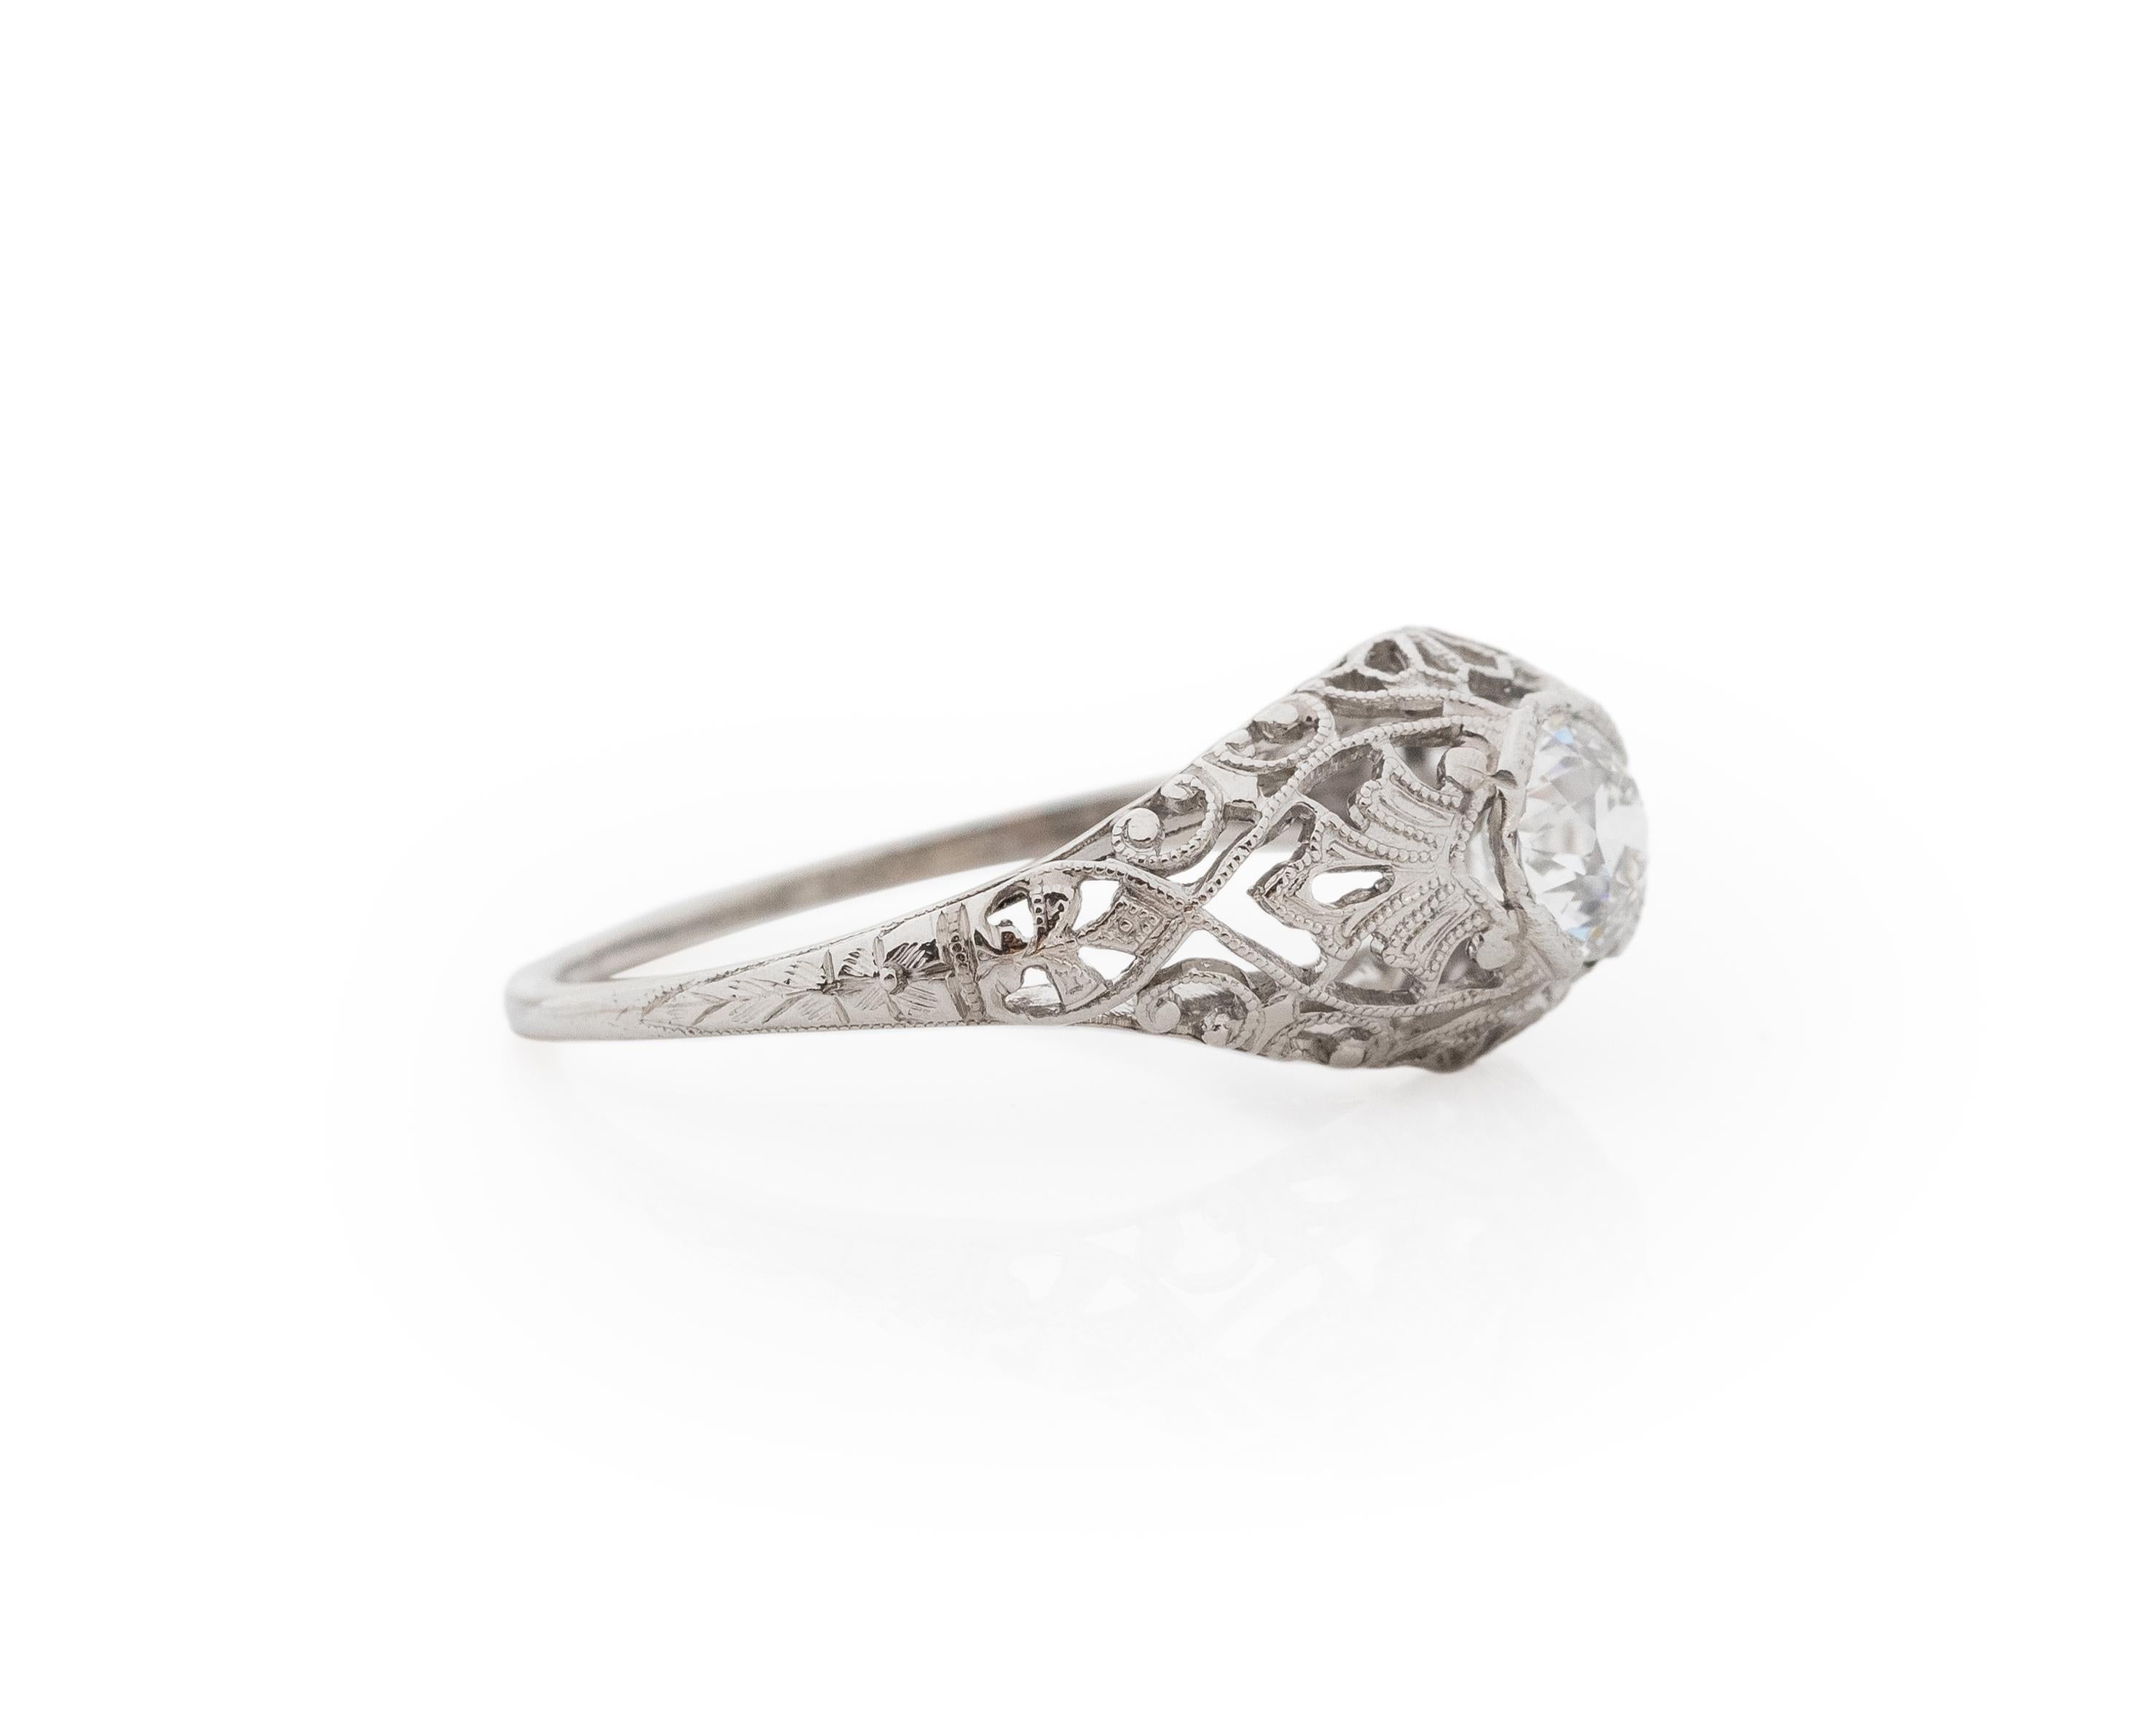 Year: 1920s

Item Details:
Ring Size: 6.25
Metal Type: Platinum [Hallmarked, and Tested]
Weight: 2.9 grams

Center Diamond Details:

GIA Report#:6234087405
Weight: 49ct total weight
Cut: Old European brilliant
Color: G
Clarity: VVS2
Type: